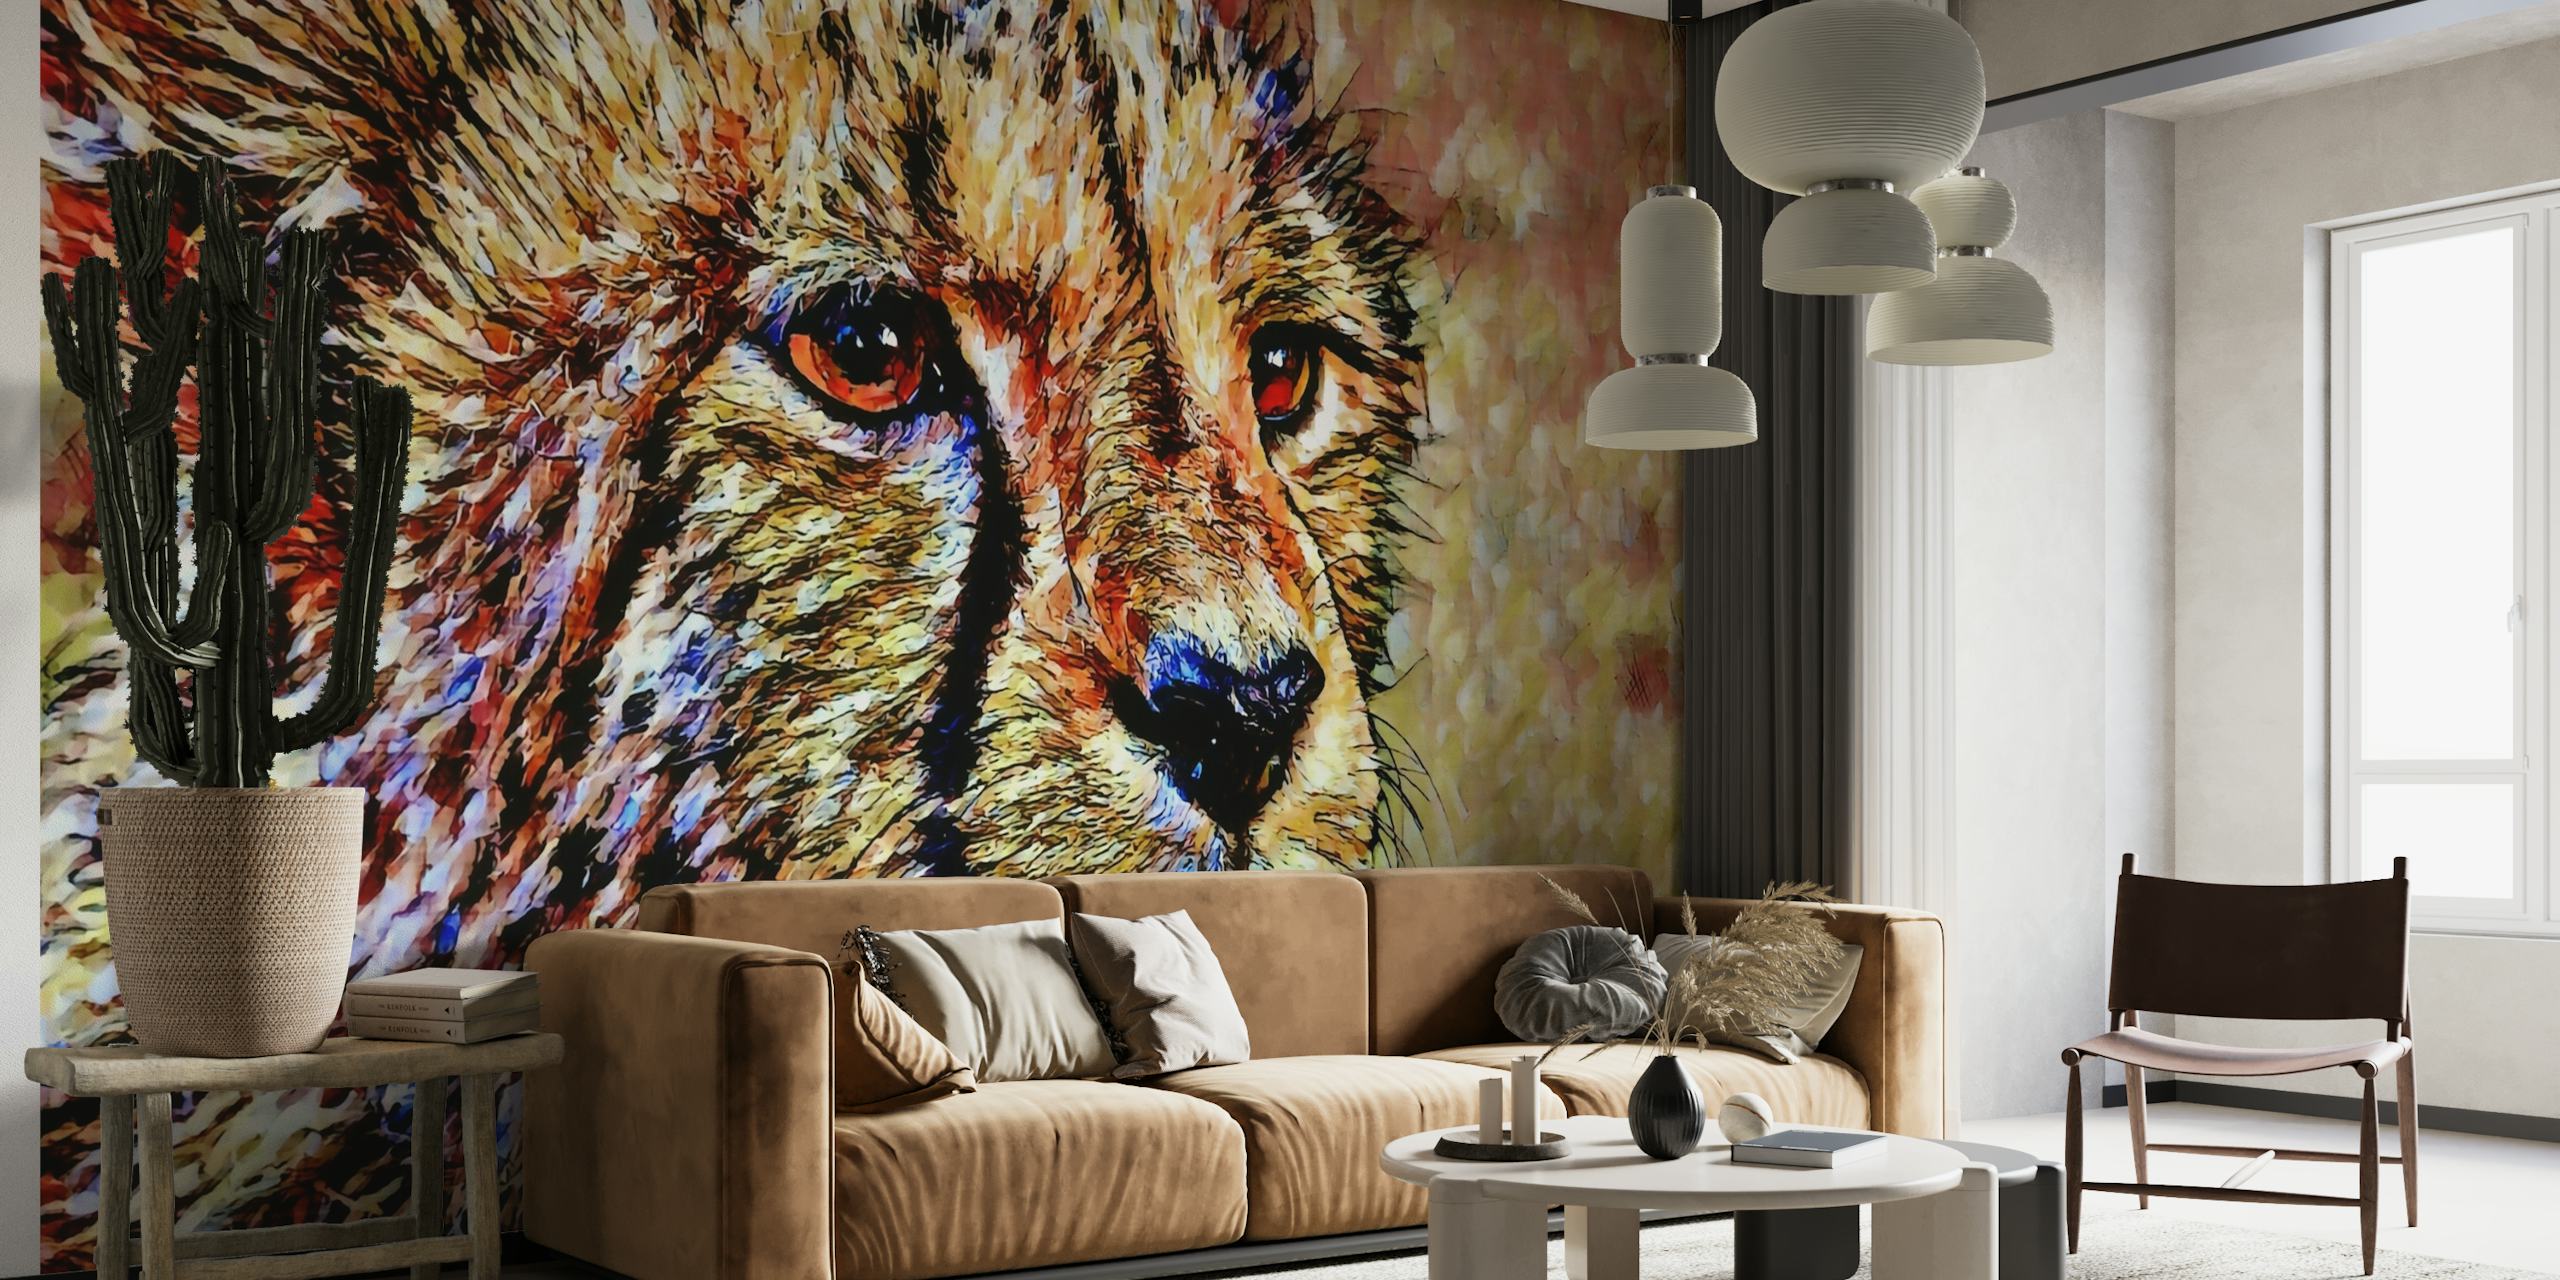 Artistic cheetah wall mural with colorful, textured brush strokes